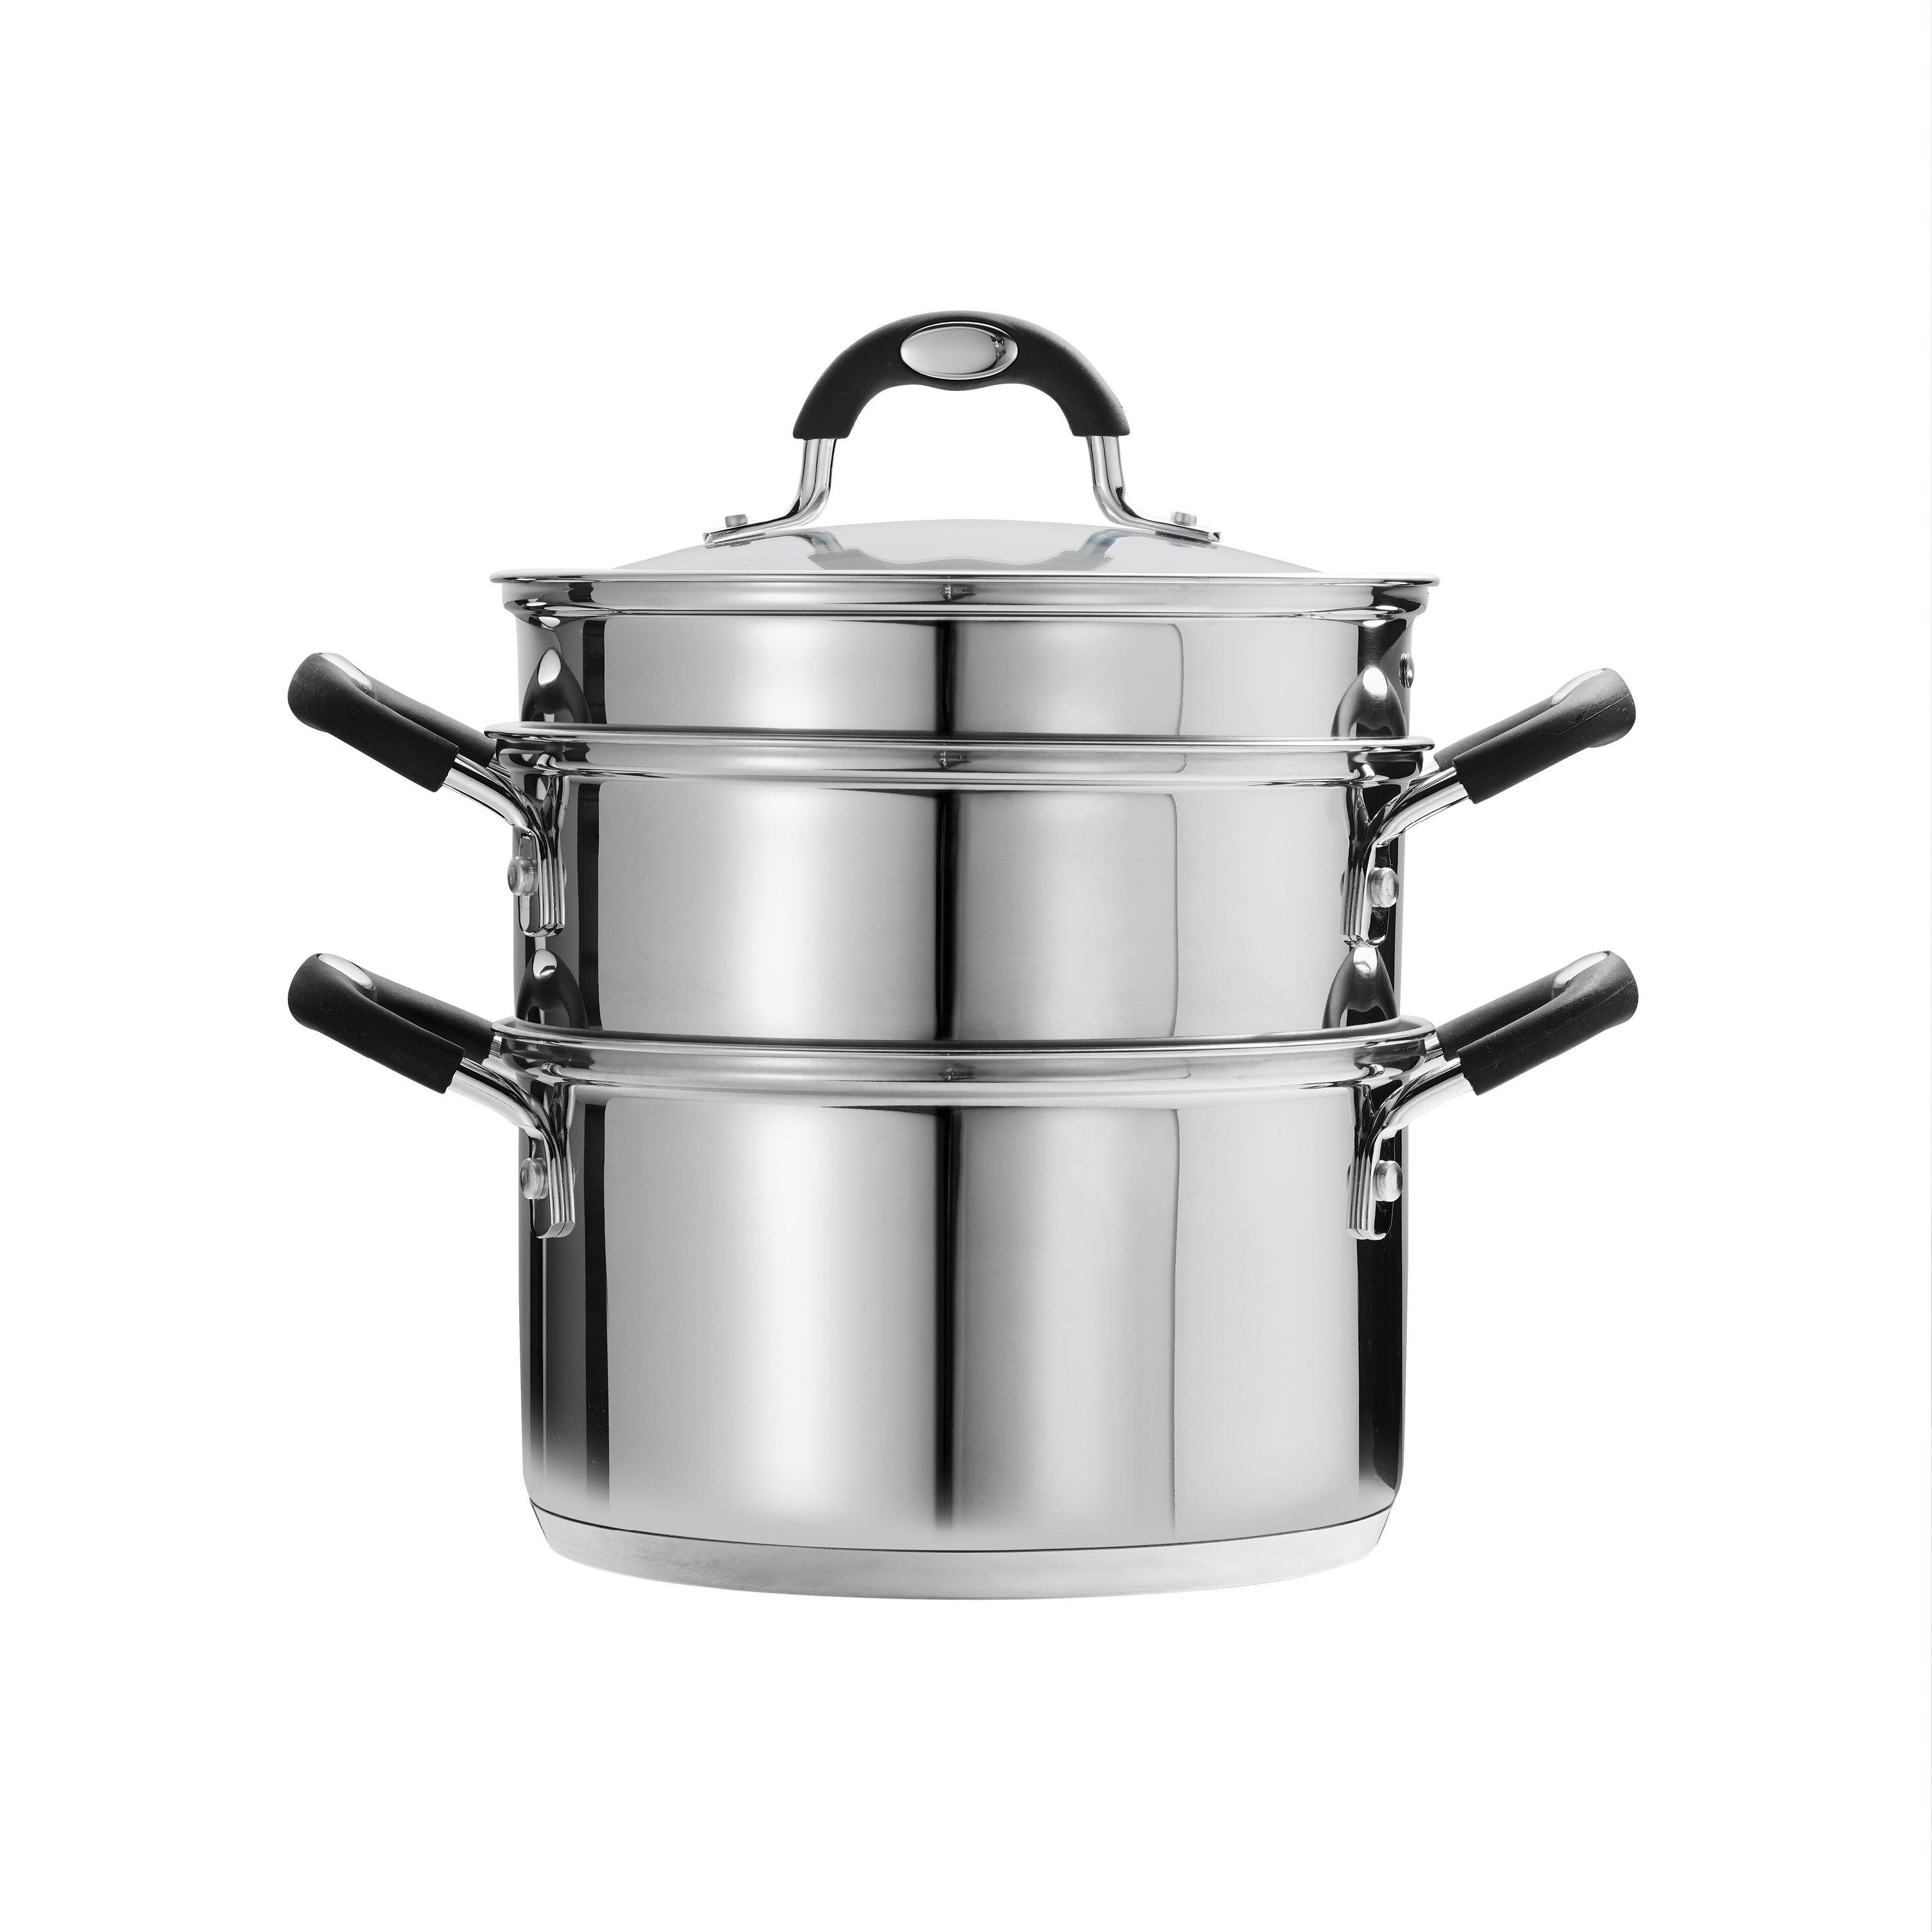 Tramontina Stainless Steel 3 Quart Steamer & Double-Boiler, 4 Piece - image 4 of 11